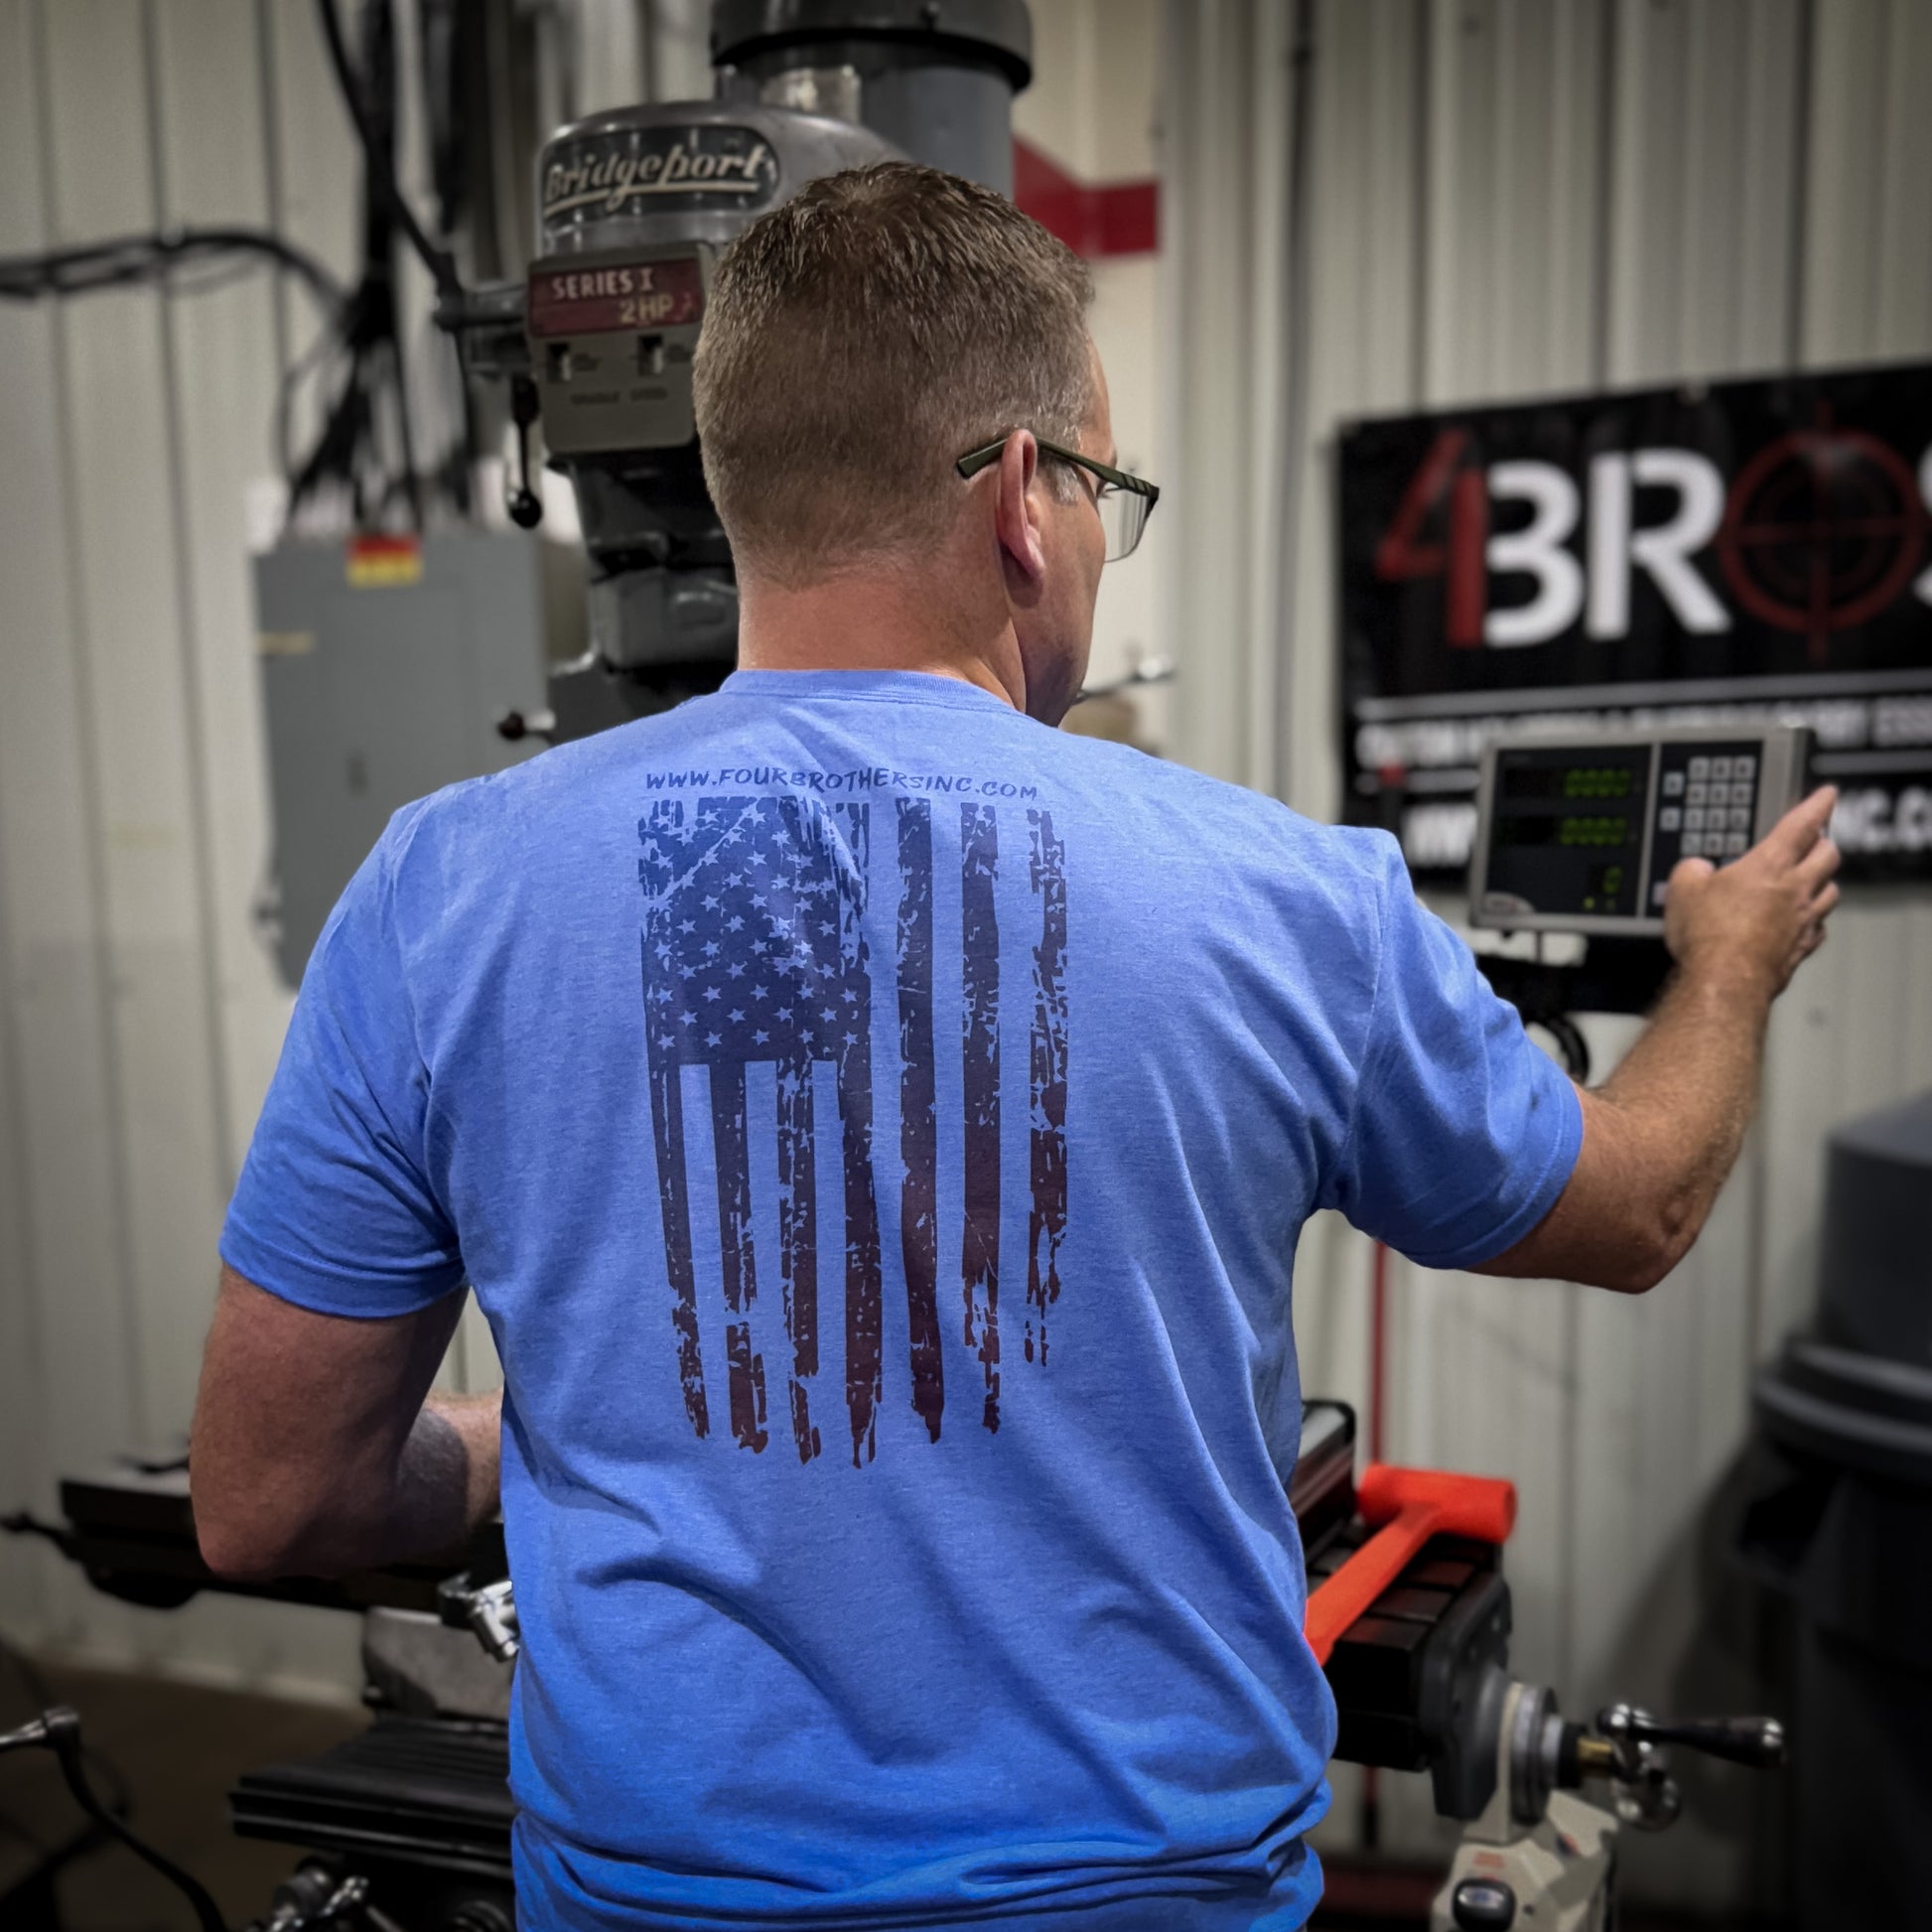 Embrace patriotism with our Worn Flag Patriotic Shirt. Soft, durable, and stylish, it's perfect for everyday wear and ideal for the 4th of July. Made from 90% ring-spun cotton and 10% polyester. Share your 'moto' pics for a chance to be featured!